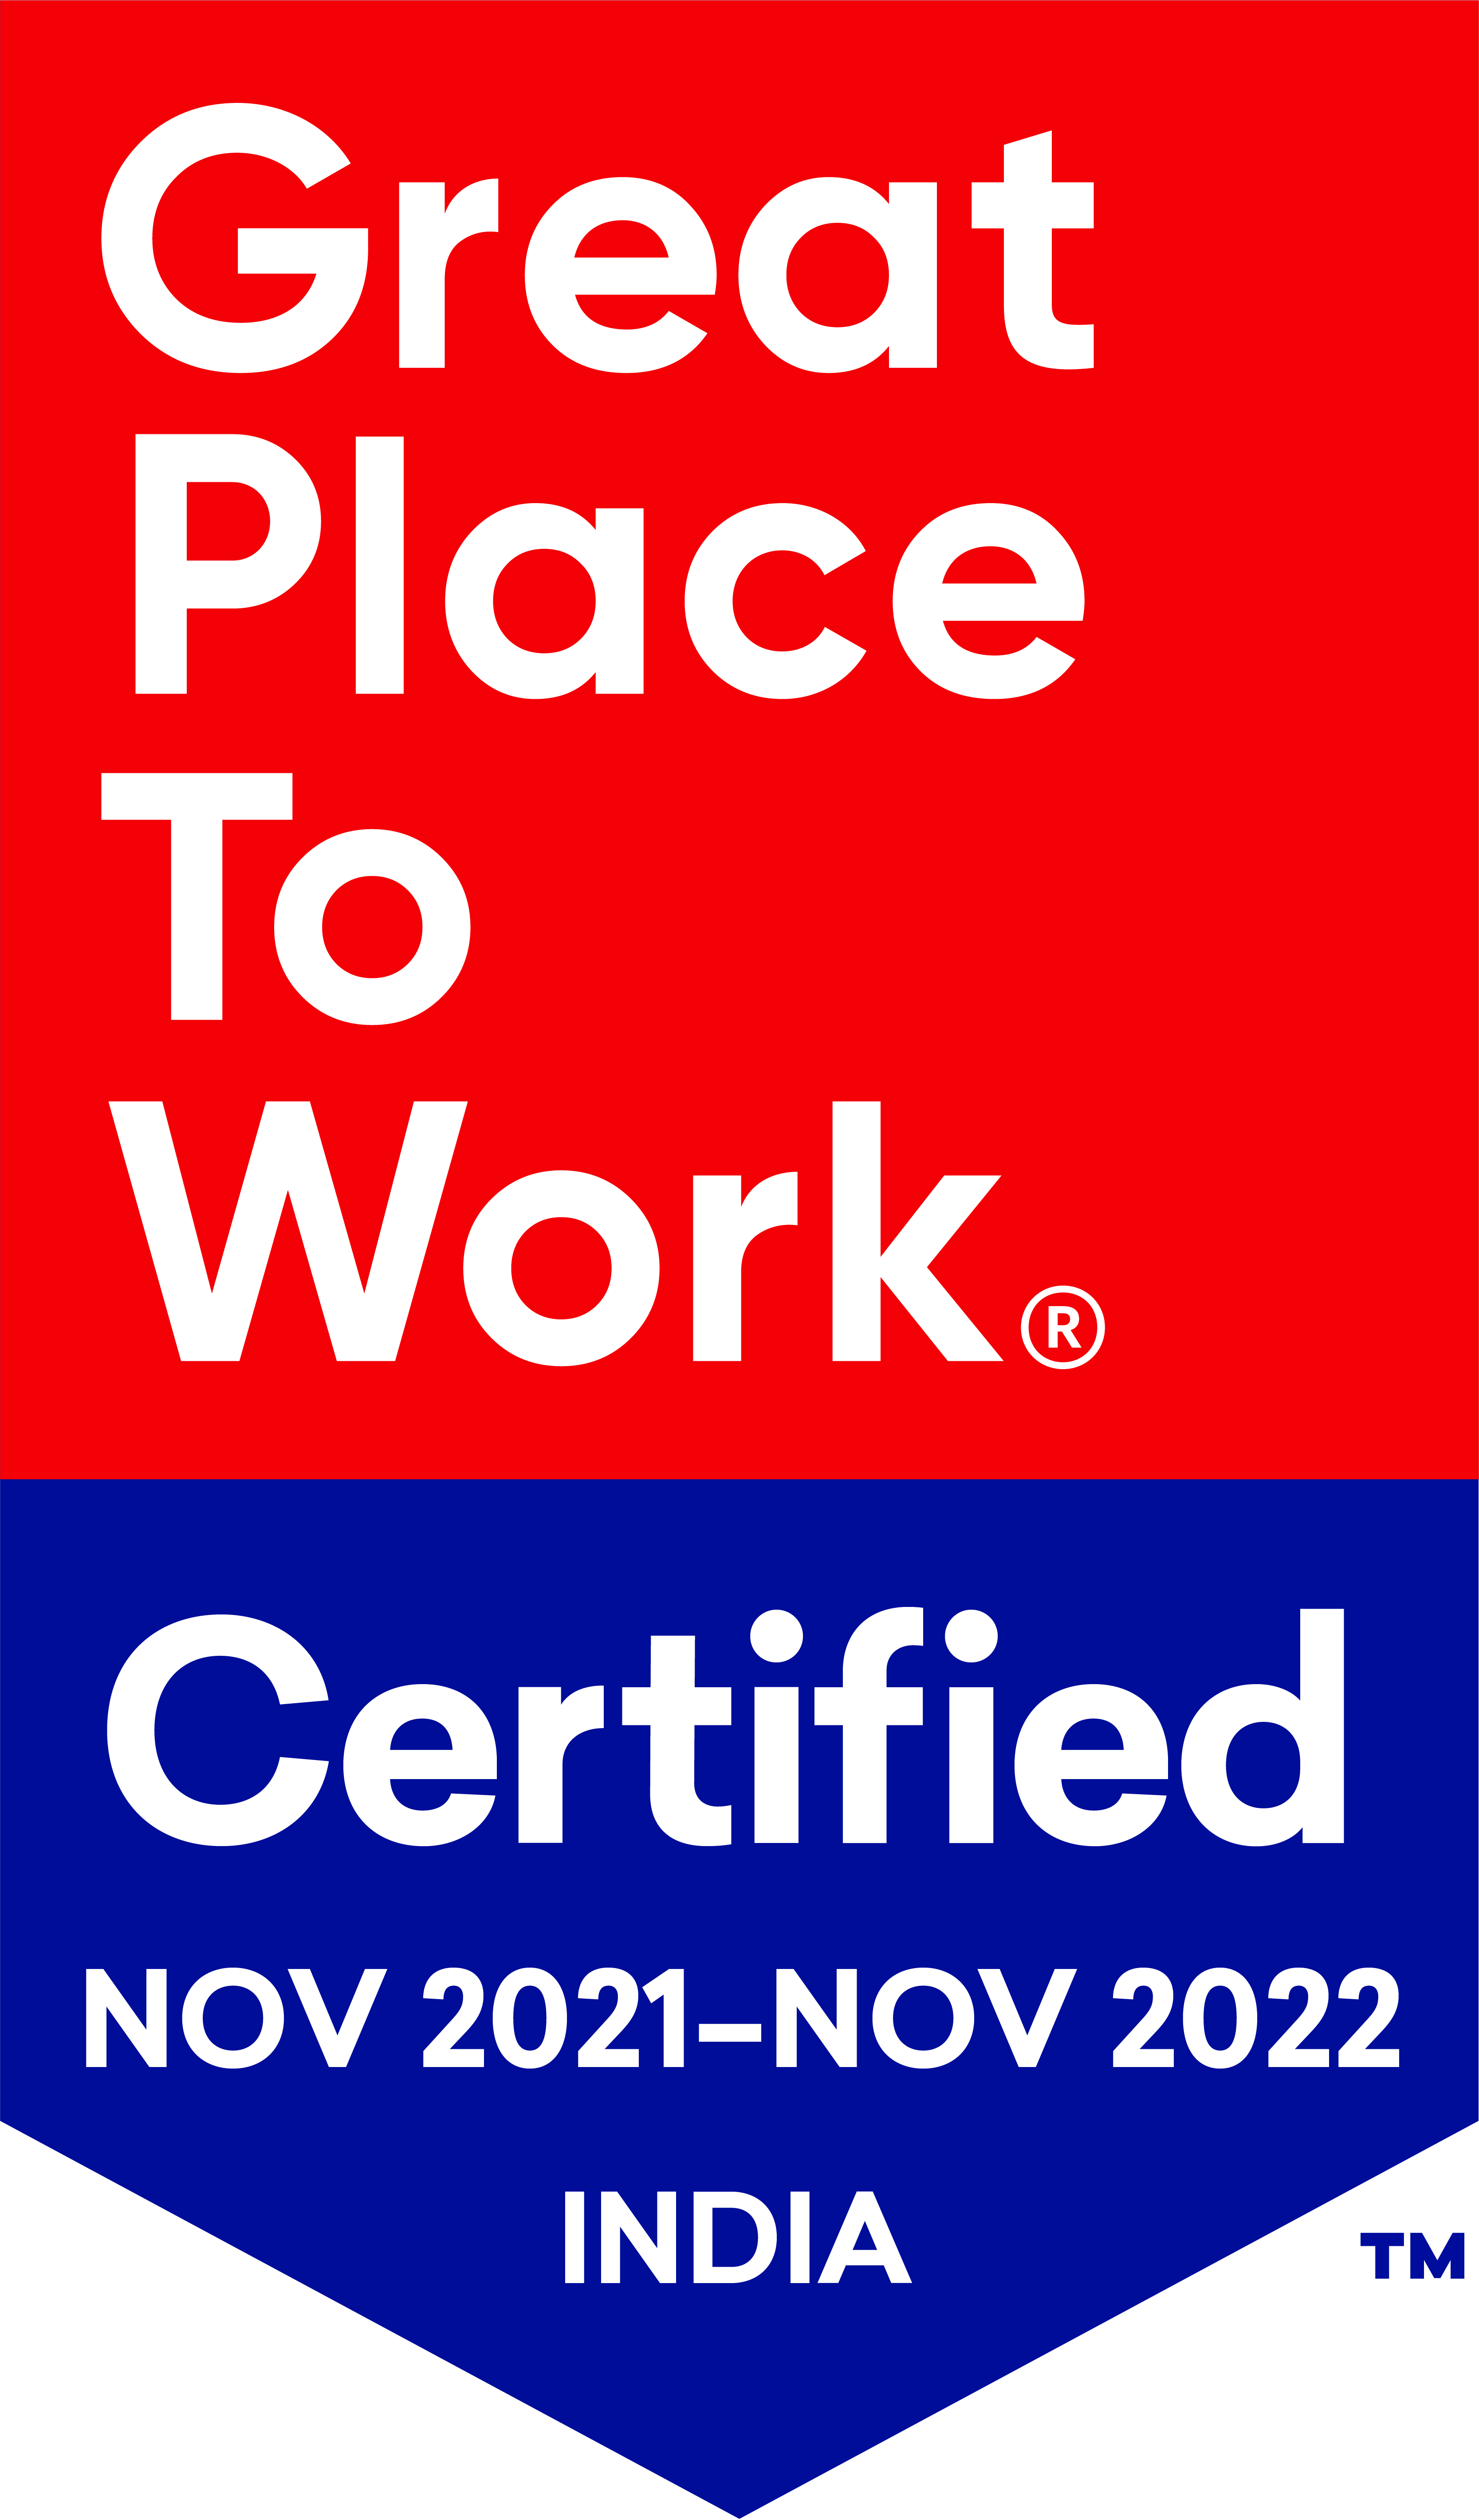 Great Place to Work Certified in India